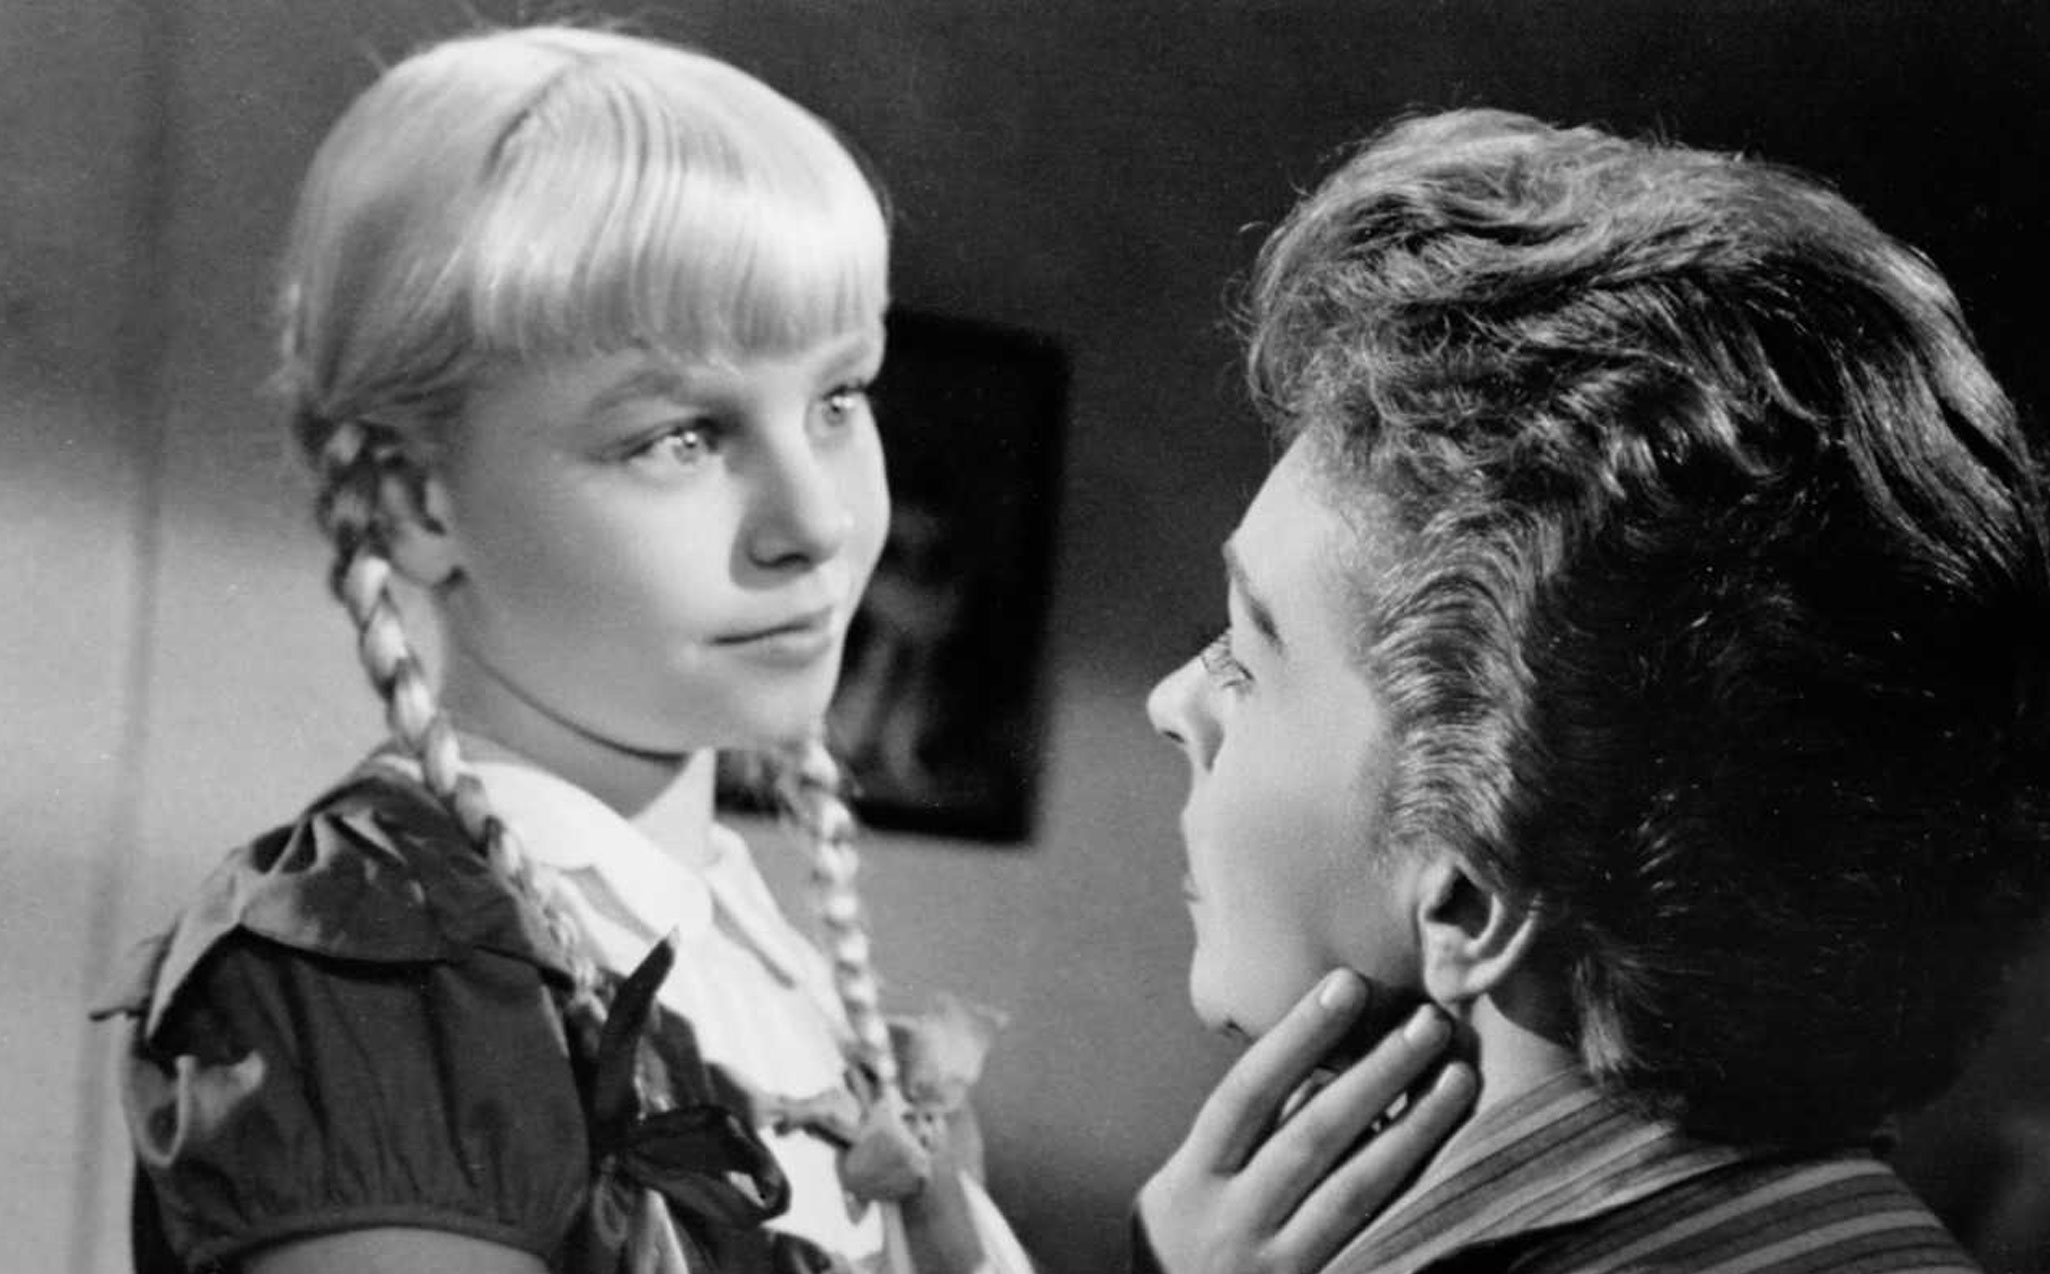 5. "The Bad Seed" (1956) - wide 11